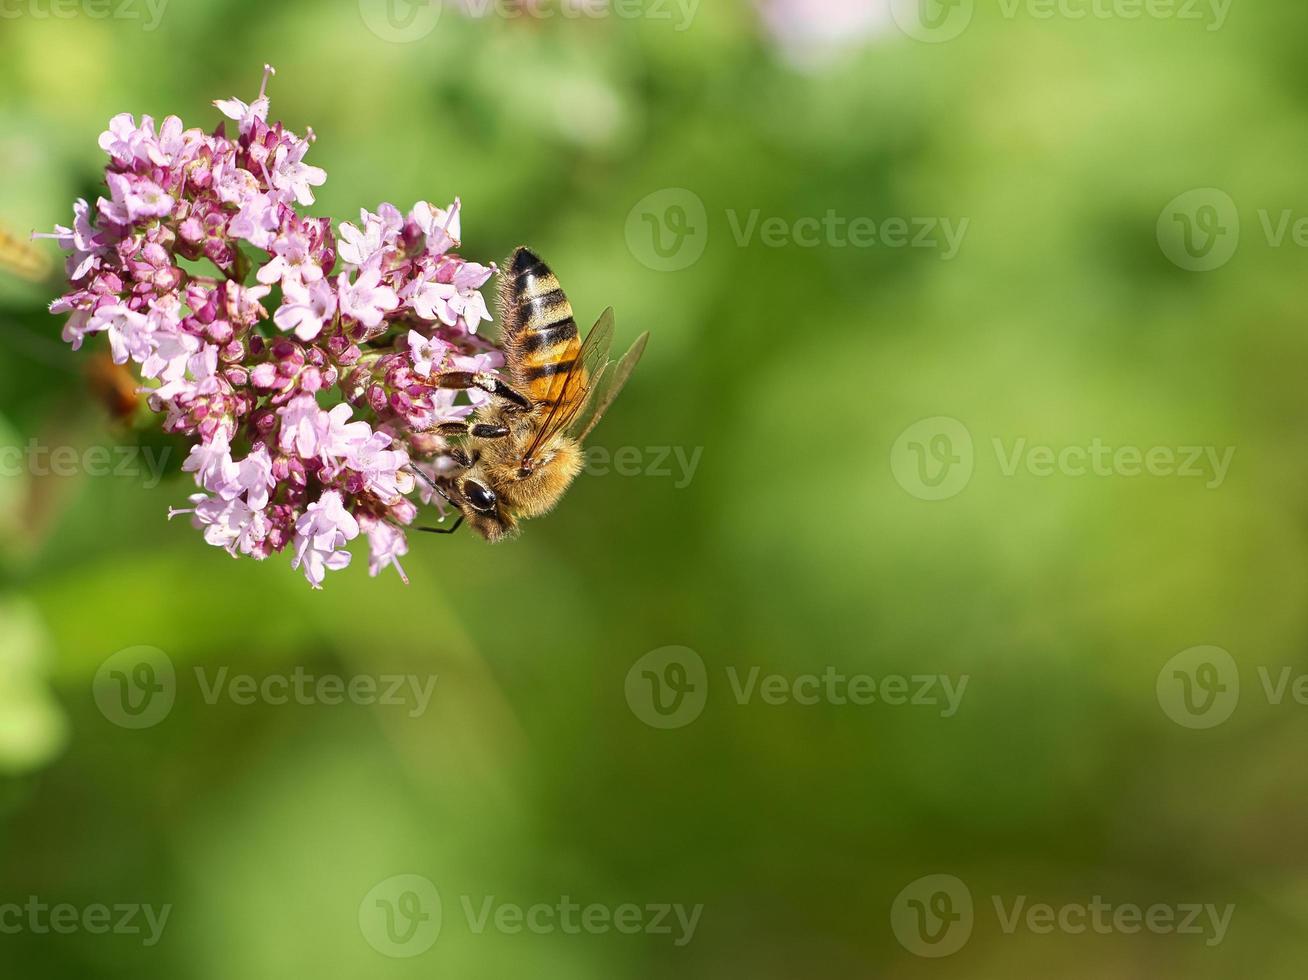 Honey bee collecting nectar on a flower of the flower butterfly bush. Busy insects photo